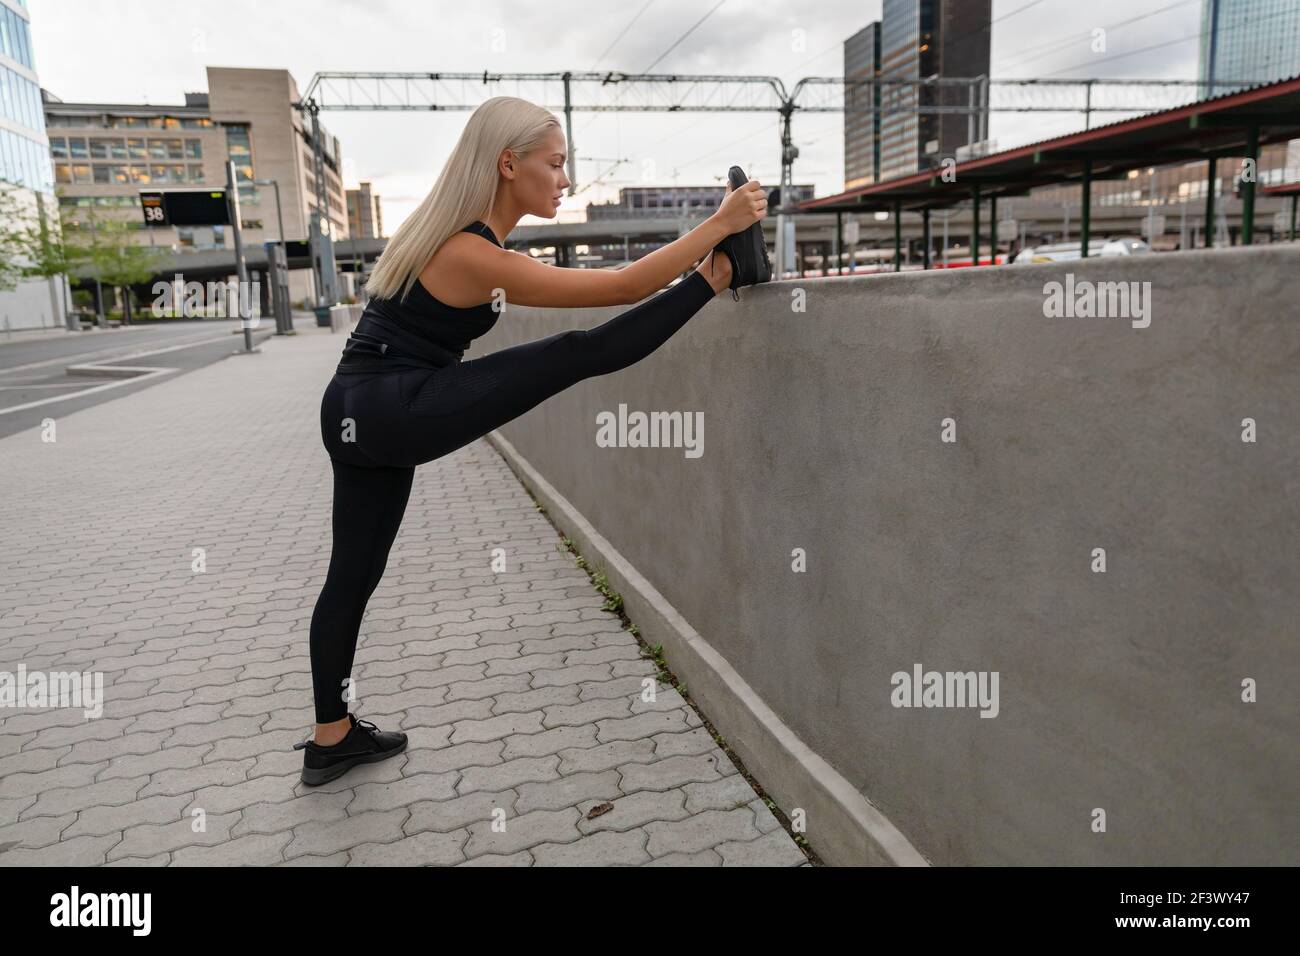 Focused Young Woman Stretching Leg On Railing In City Stock Photo